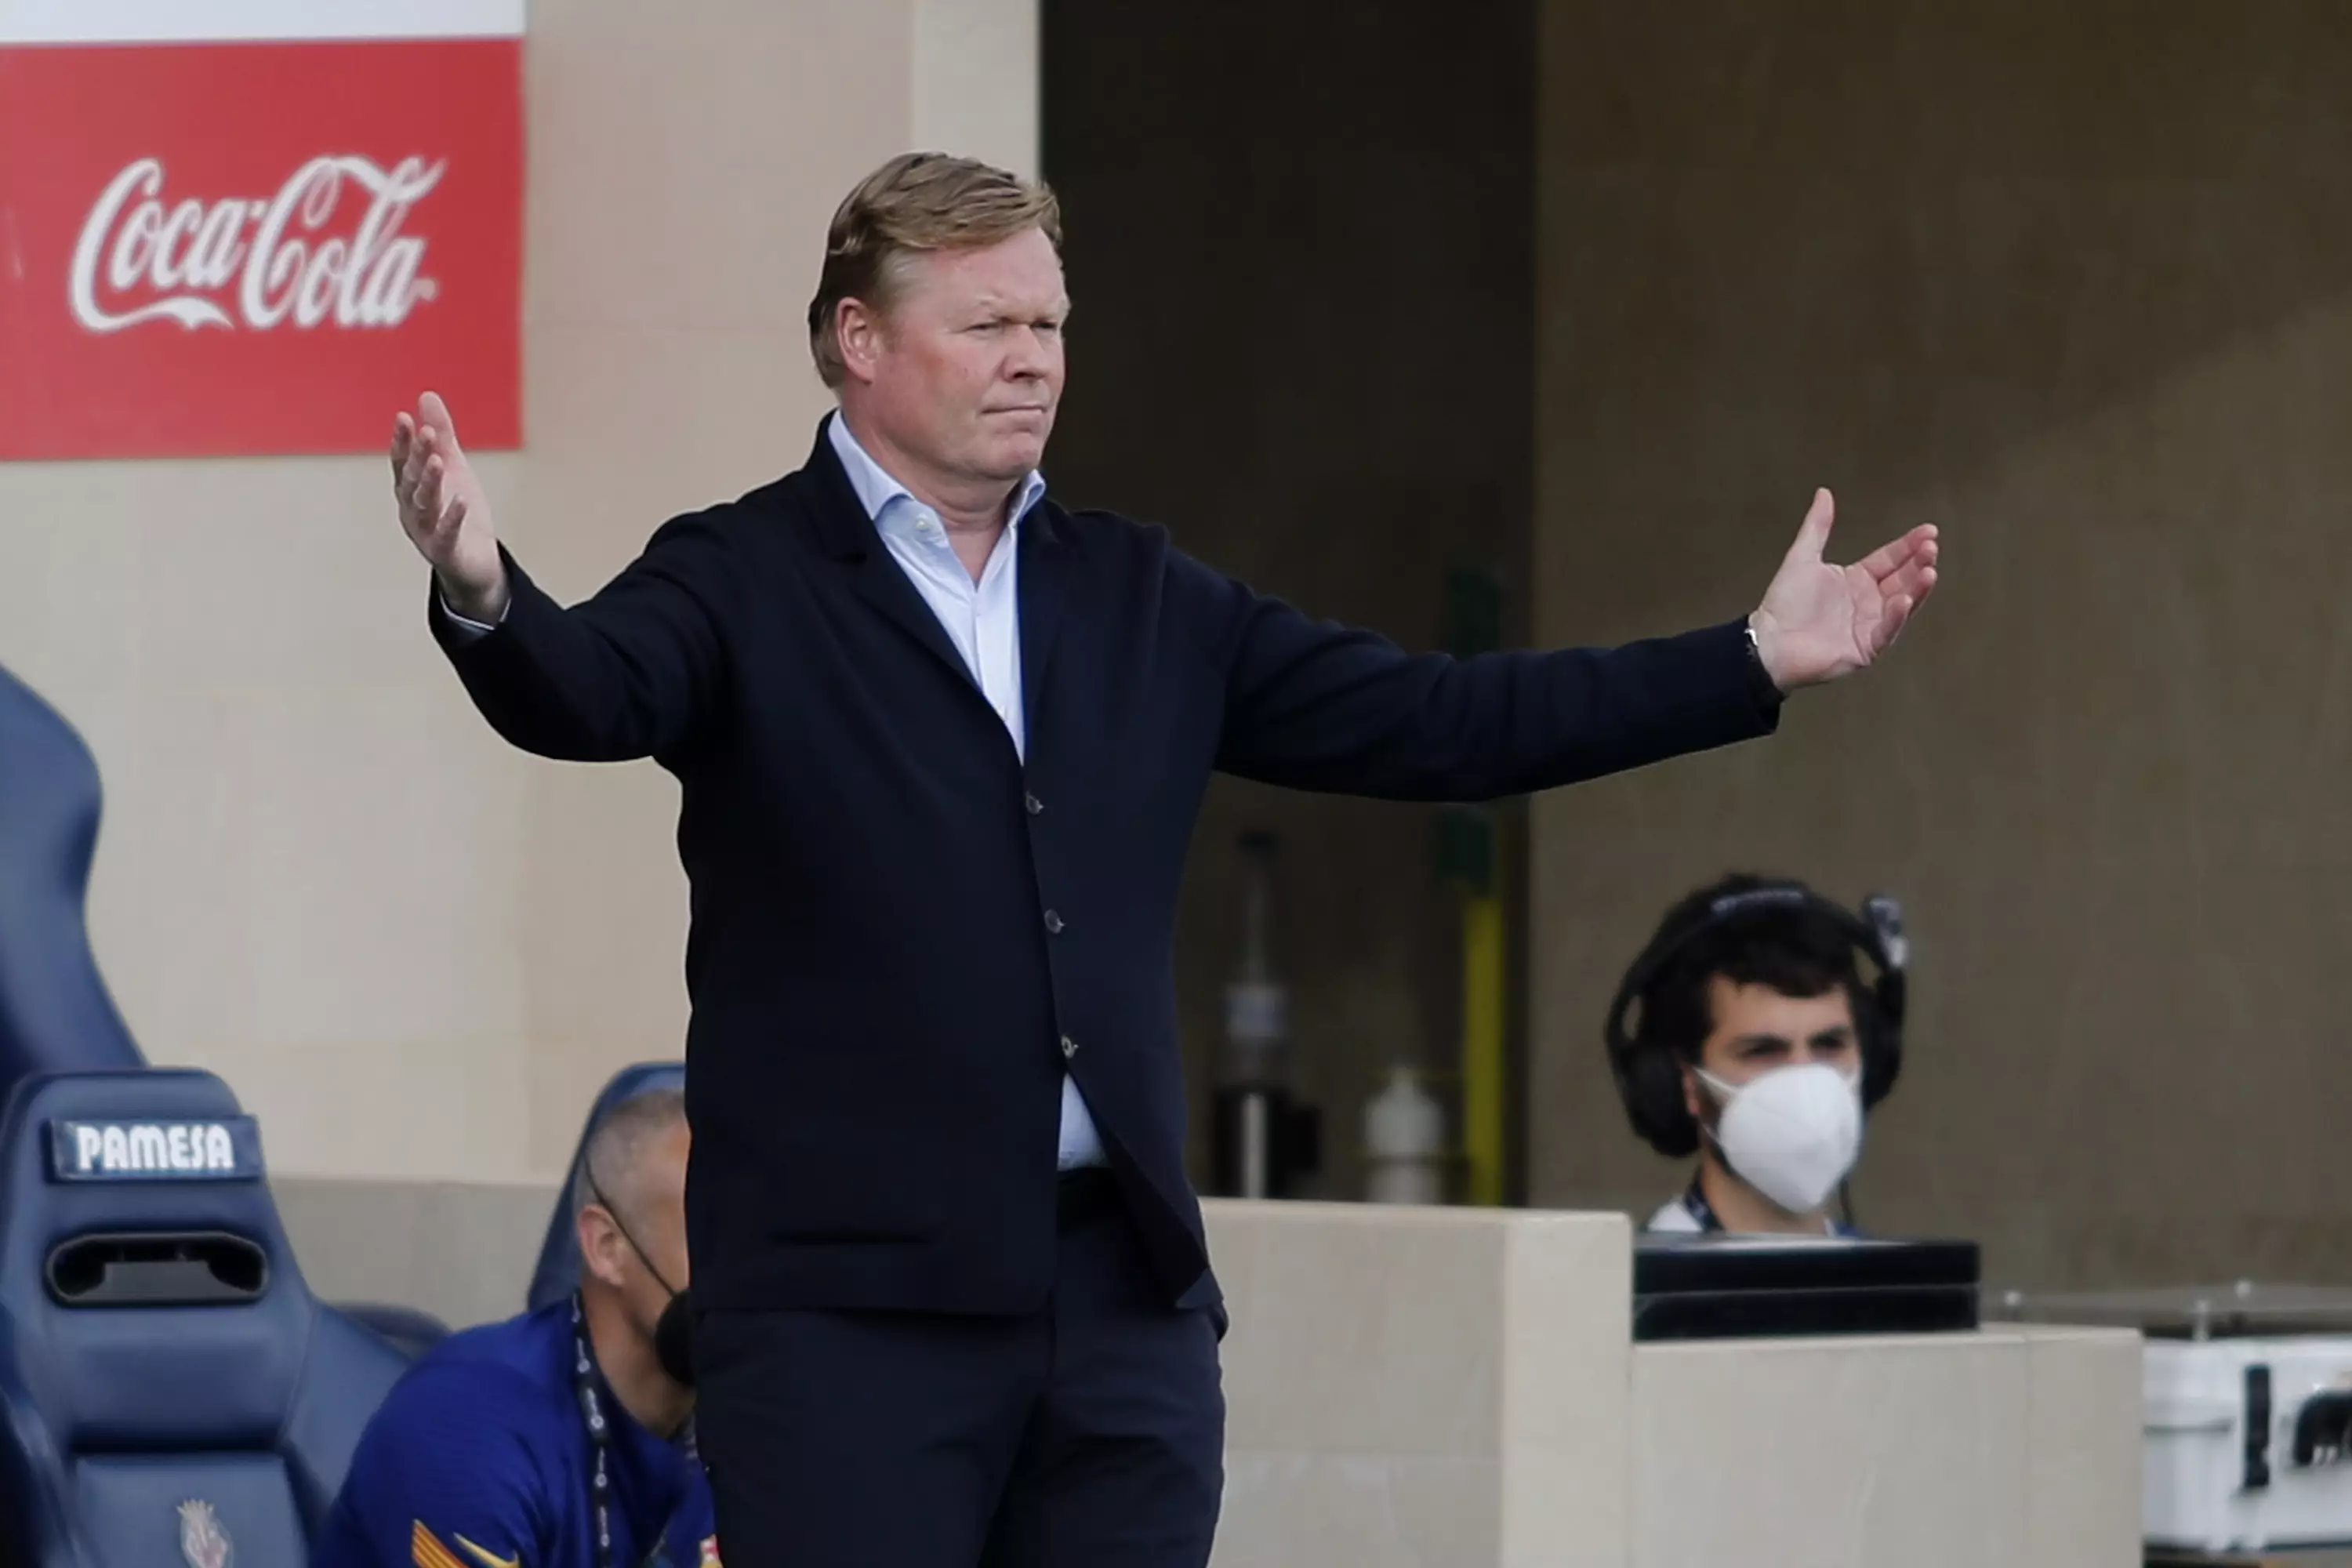 Koeman reacting to the current situation. Image: PA Images